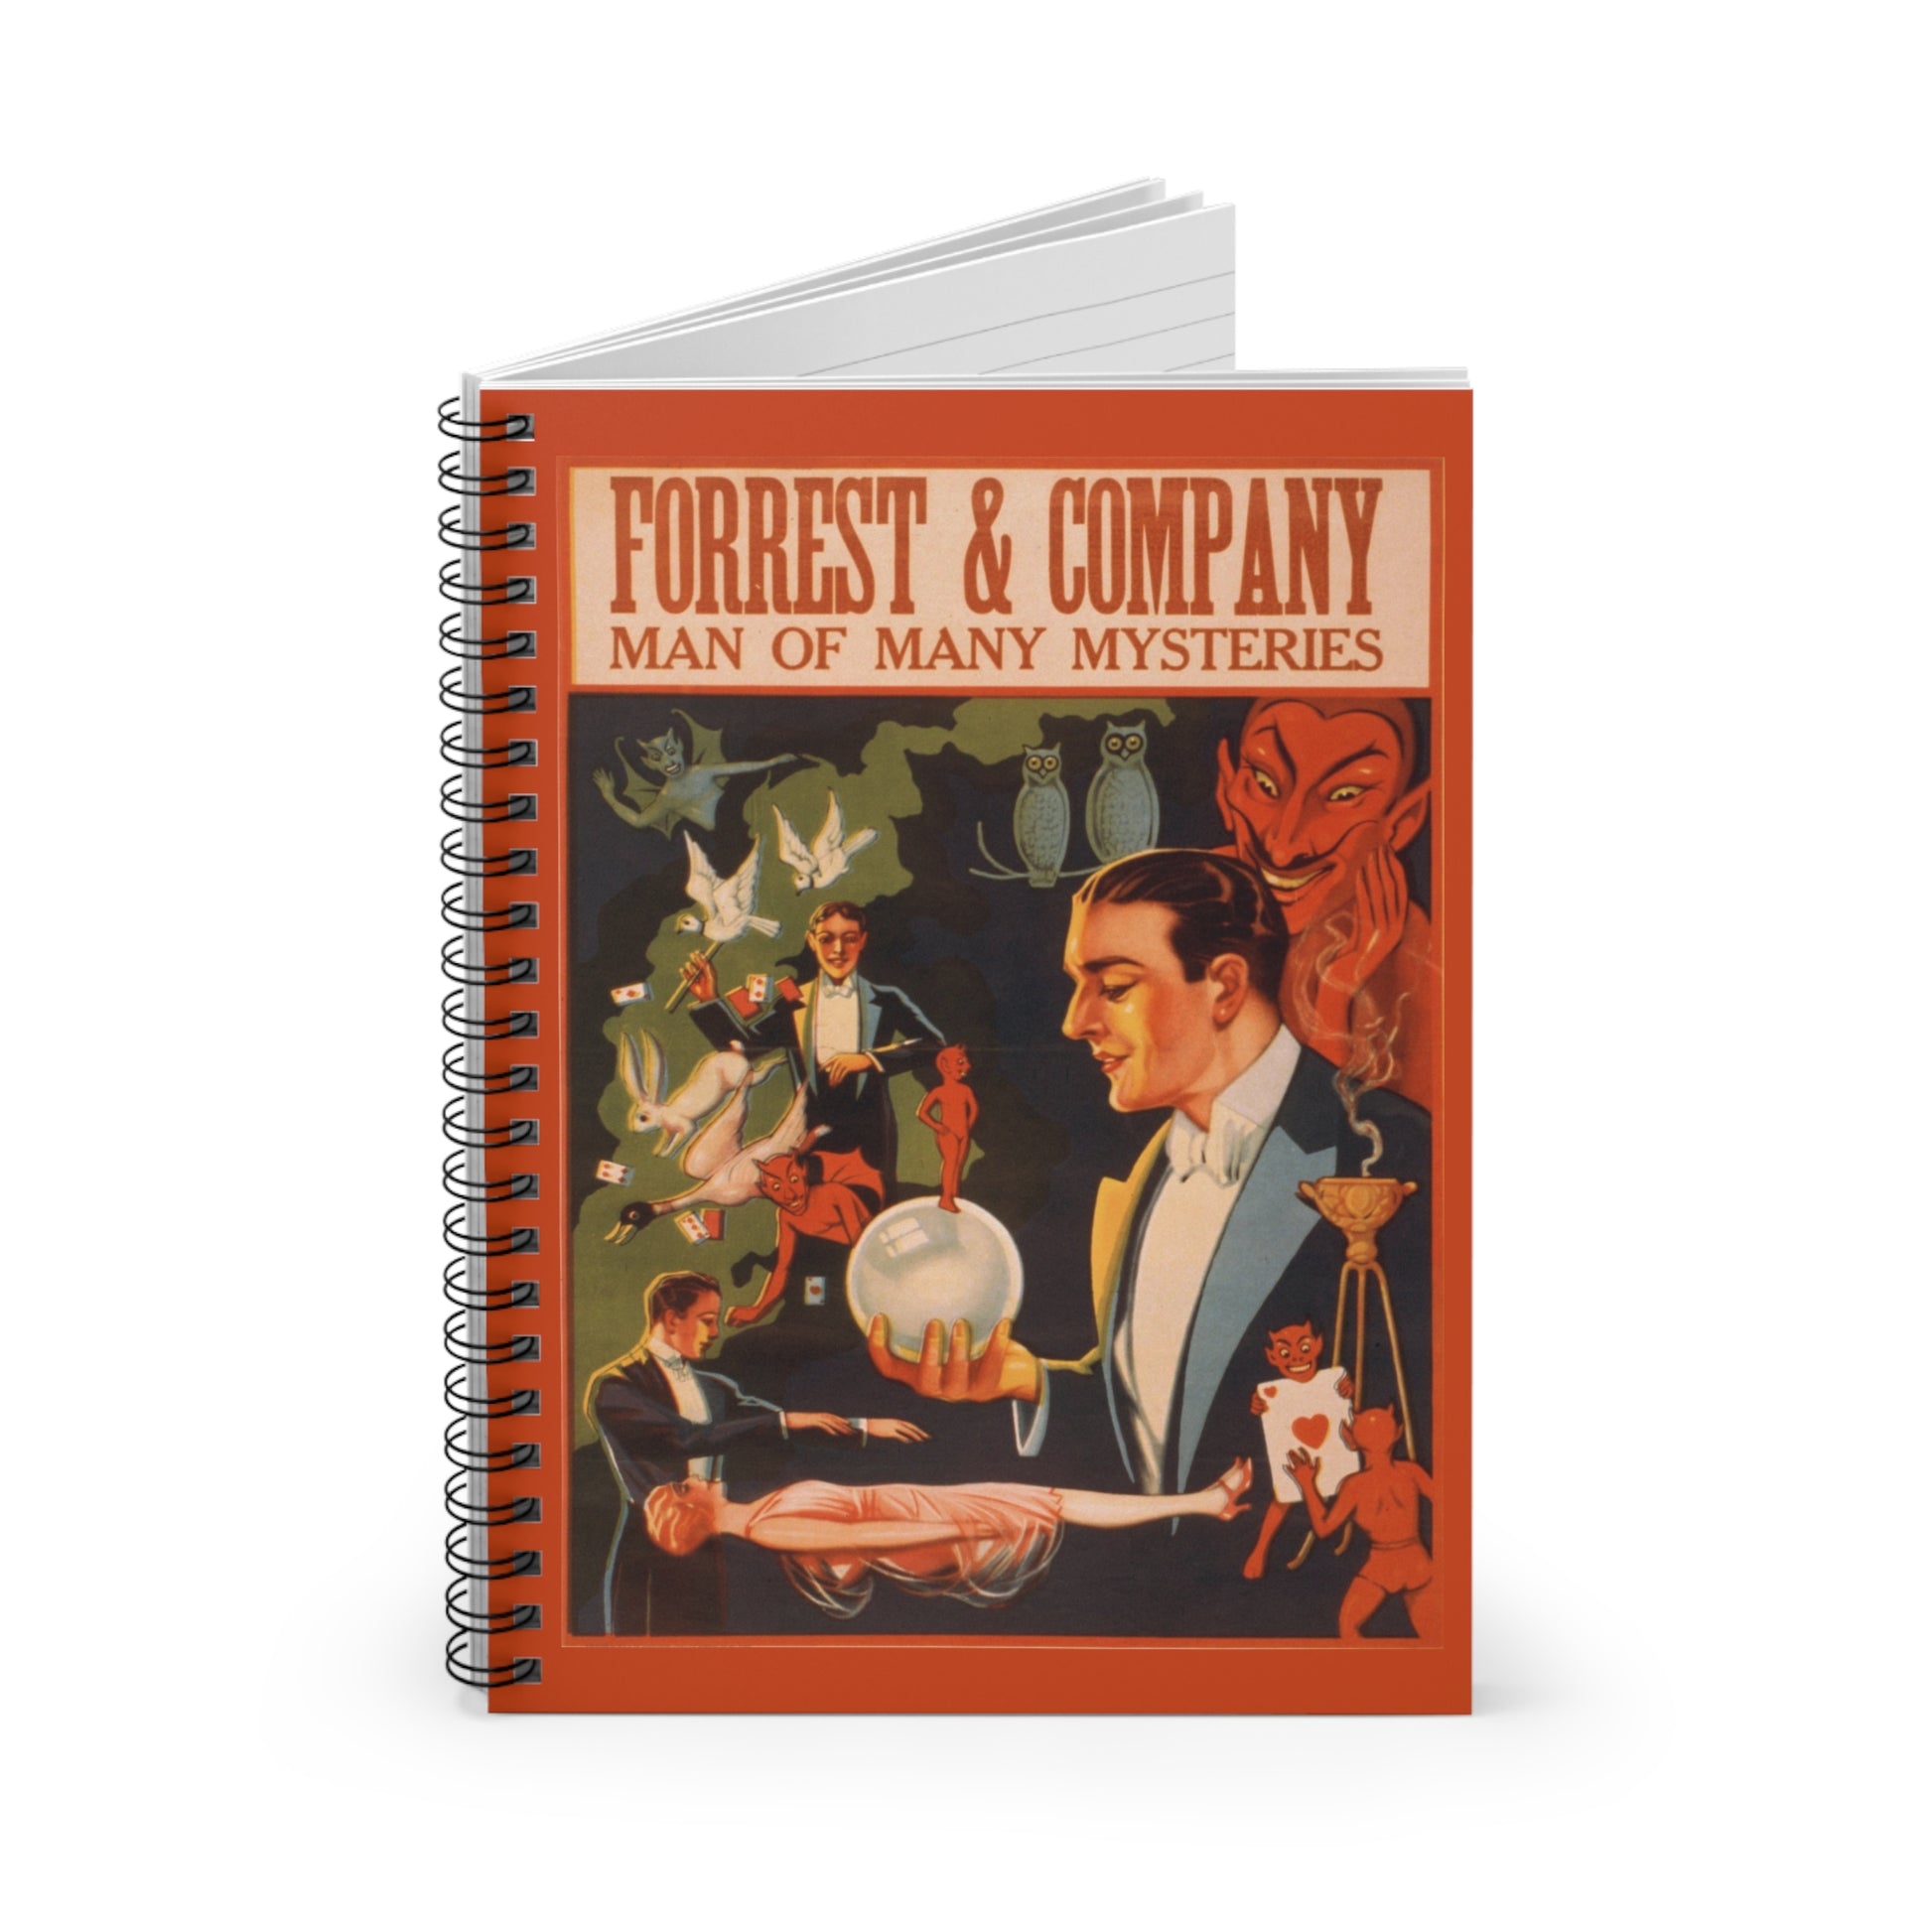 Spiral notebook with the front cover of a vintage poster of the Vaudeville entertainment Forrest & Company, Man of Many Mysteries.